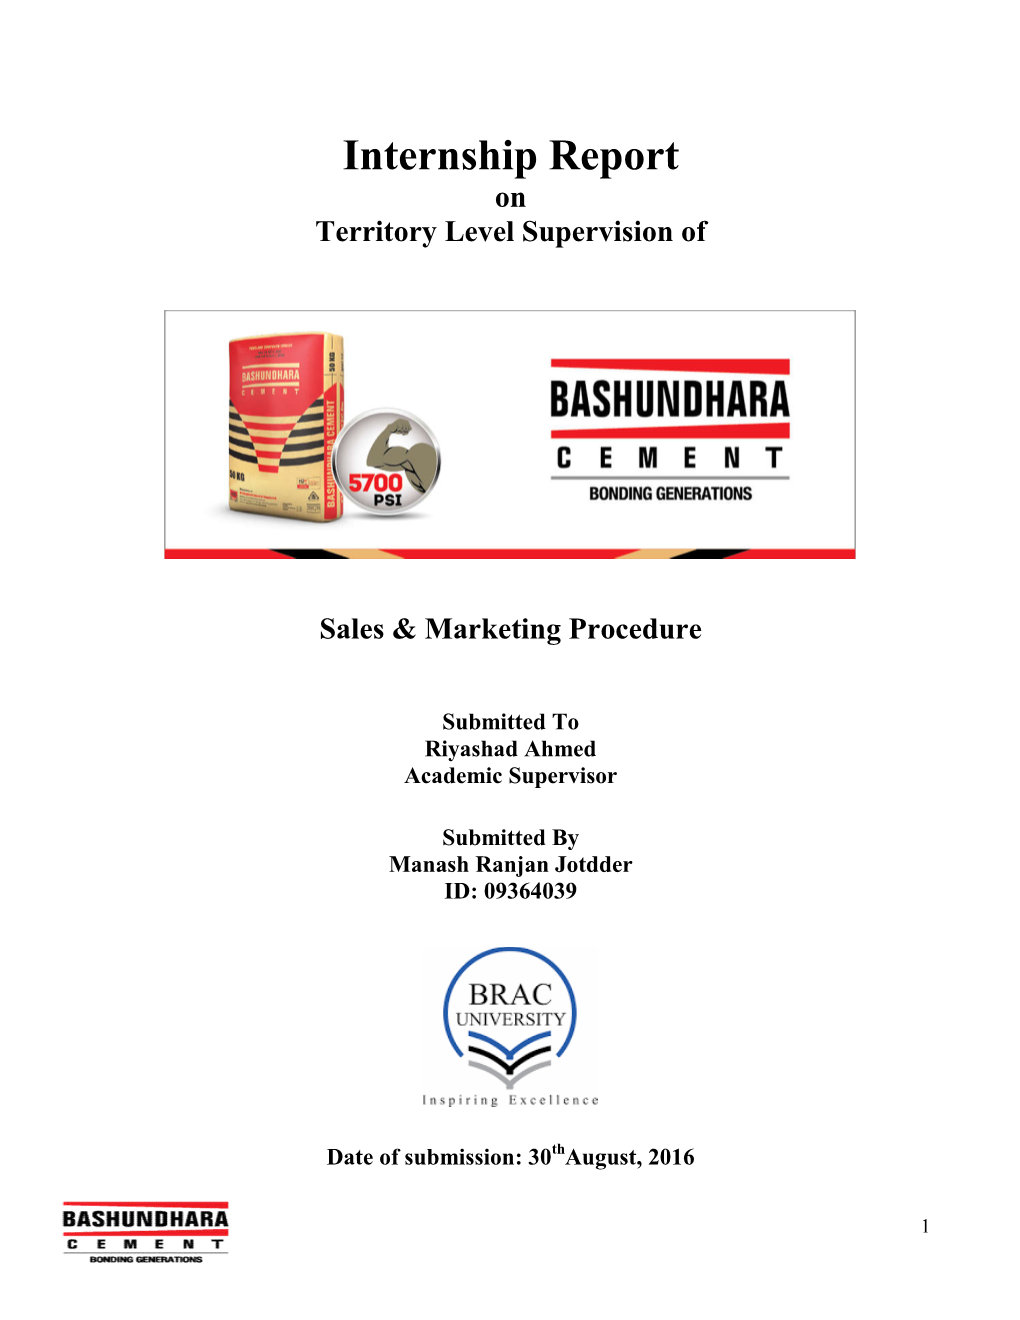 Internship Report on Territory Level Supervision Of